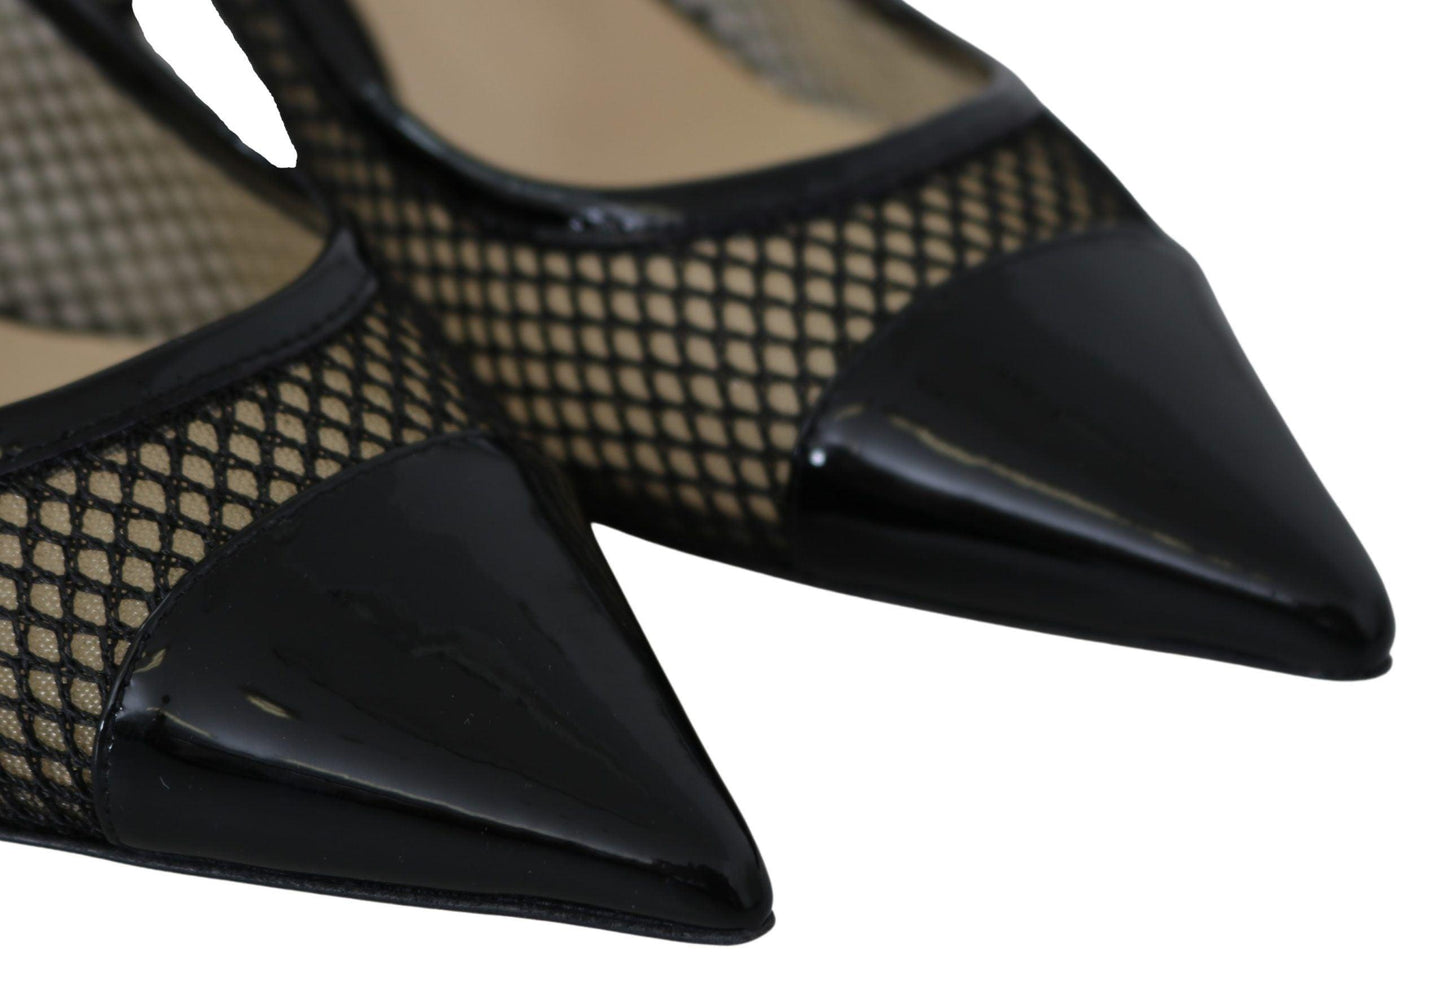 Jimmy Choo Black Mesh and Leather Amika 50 Pumps - Designed by Jimmy Choo Available to Buy at a Discounted Price on Moon Behind The Hill Online Designer Discount Store